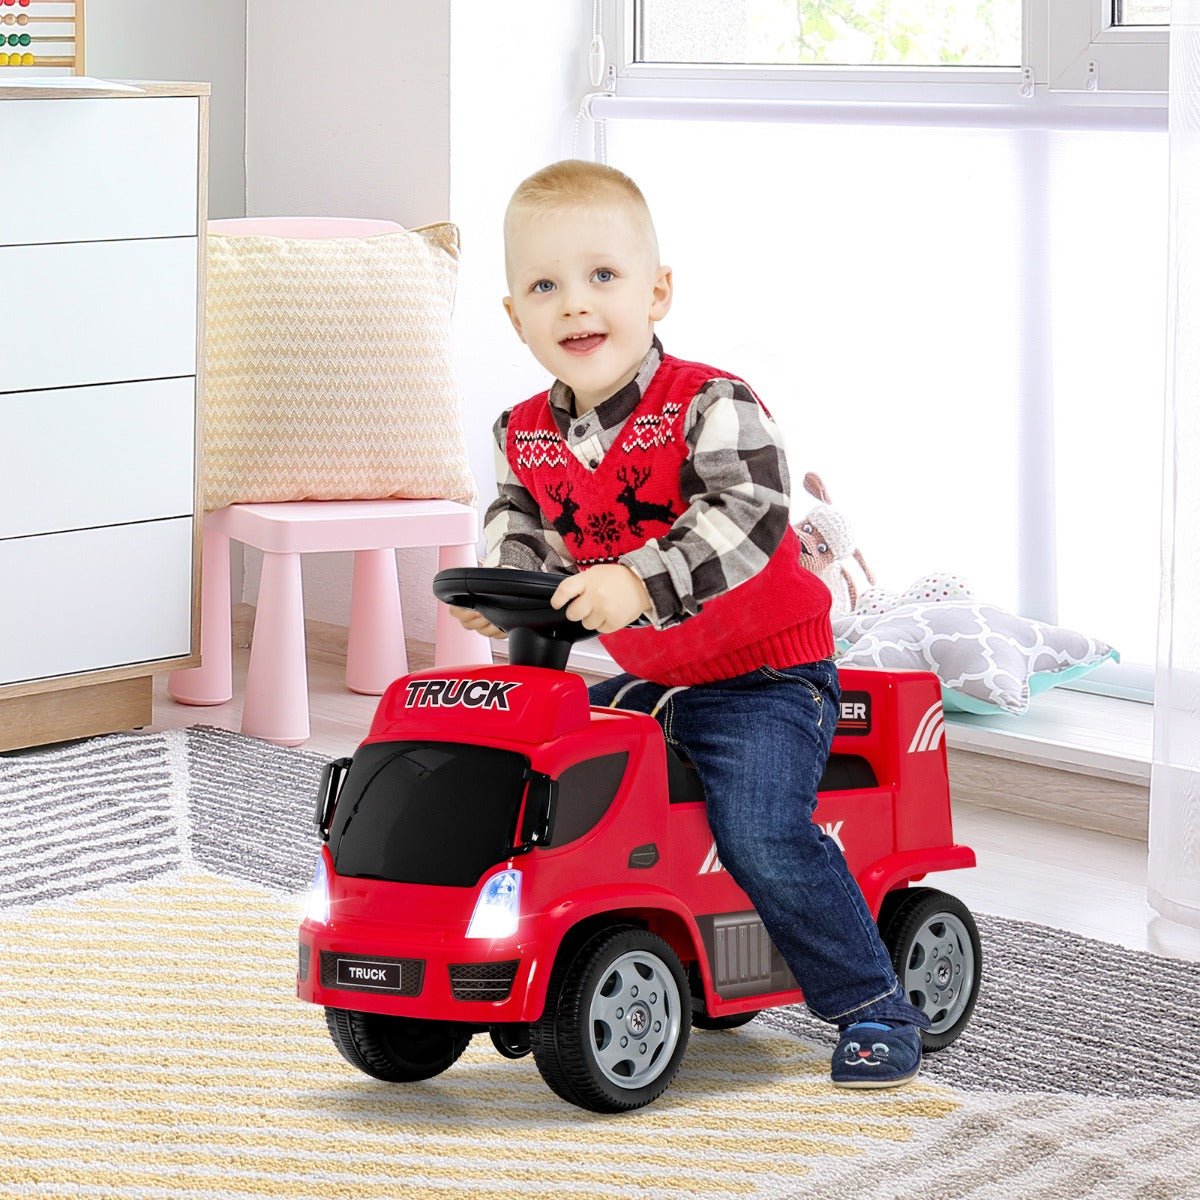 Discover Adventure with a Red Kids Ride On Truck